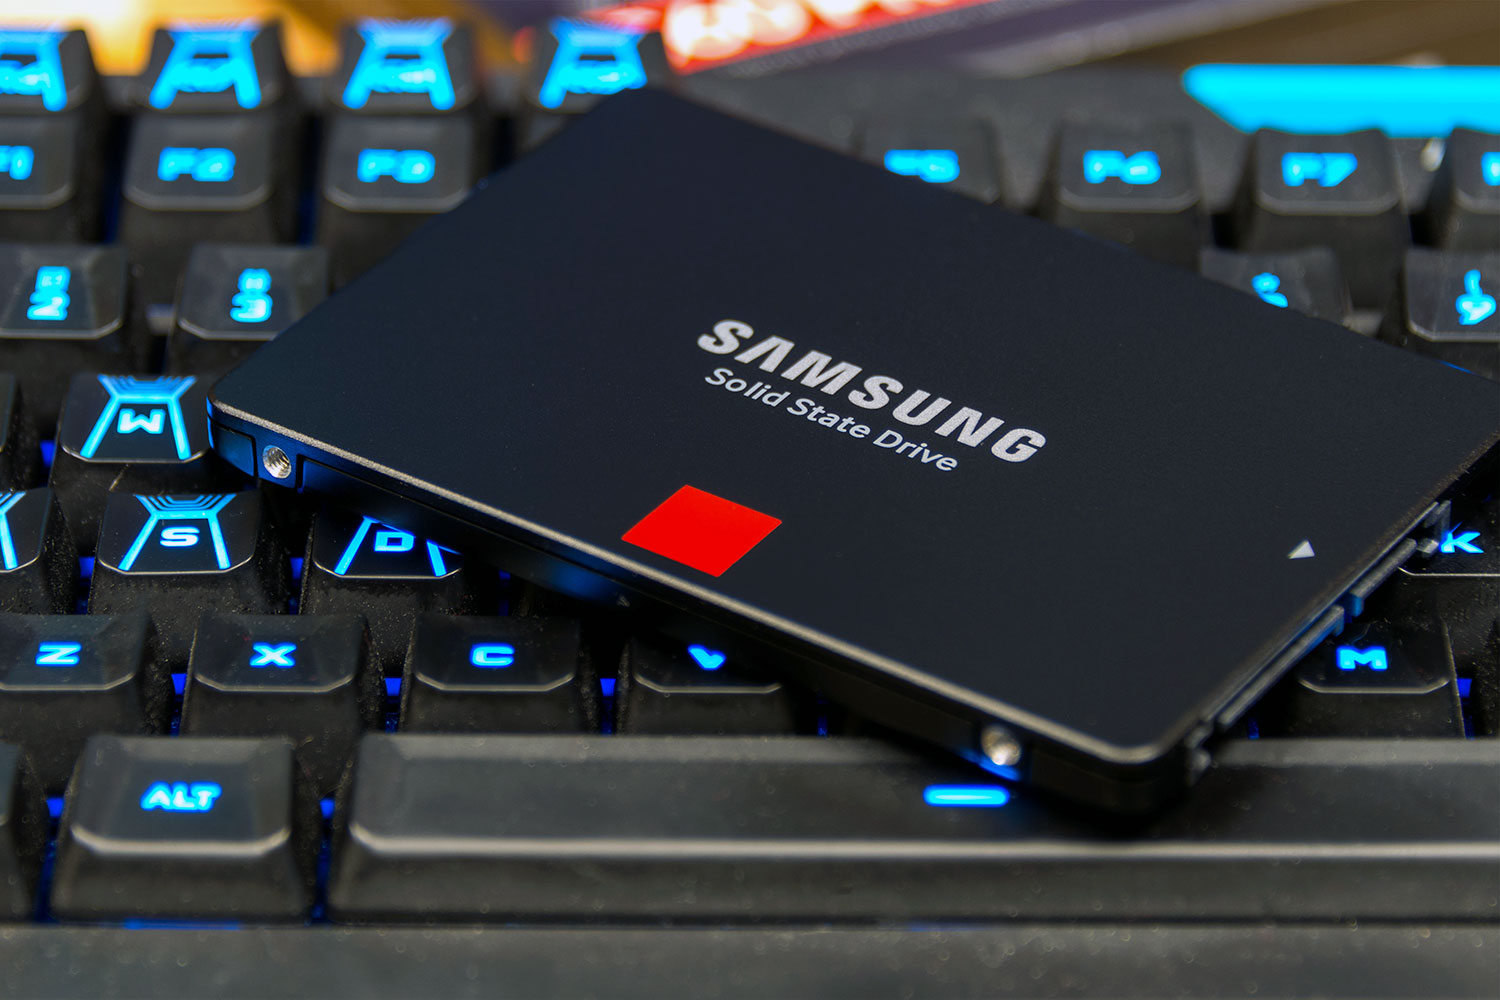 Samsung 860 Pro review